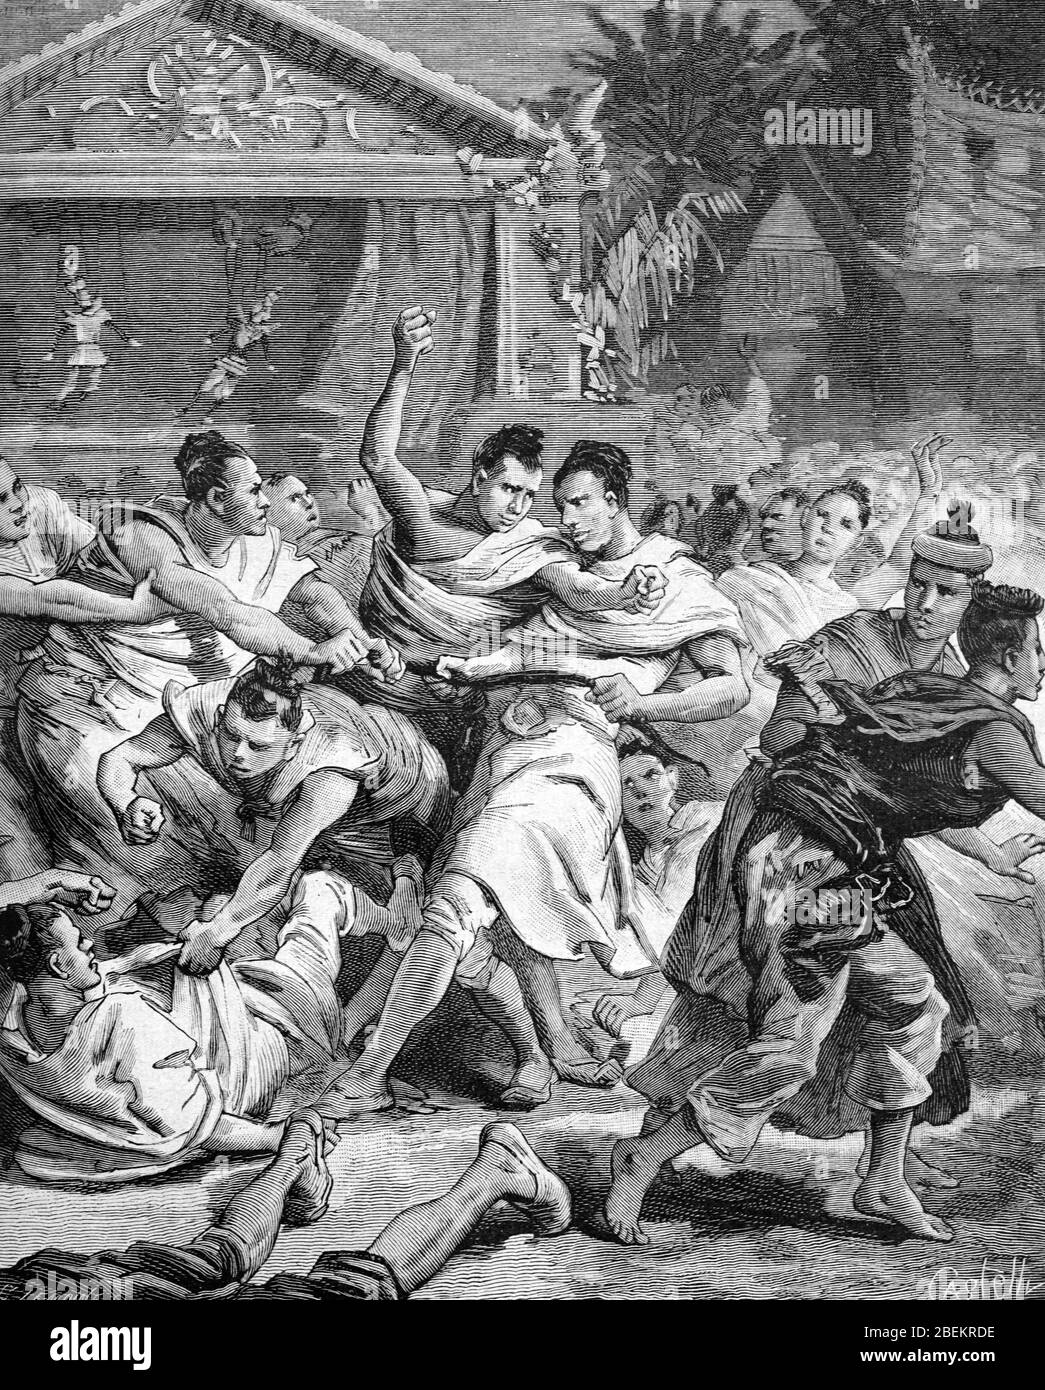 Fight or Riot during a Theatre Performance in Rangoon or Yangon, Burma or Myanmar. Vintage or Old Illustration or Engraving 1887 Stock Photo